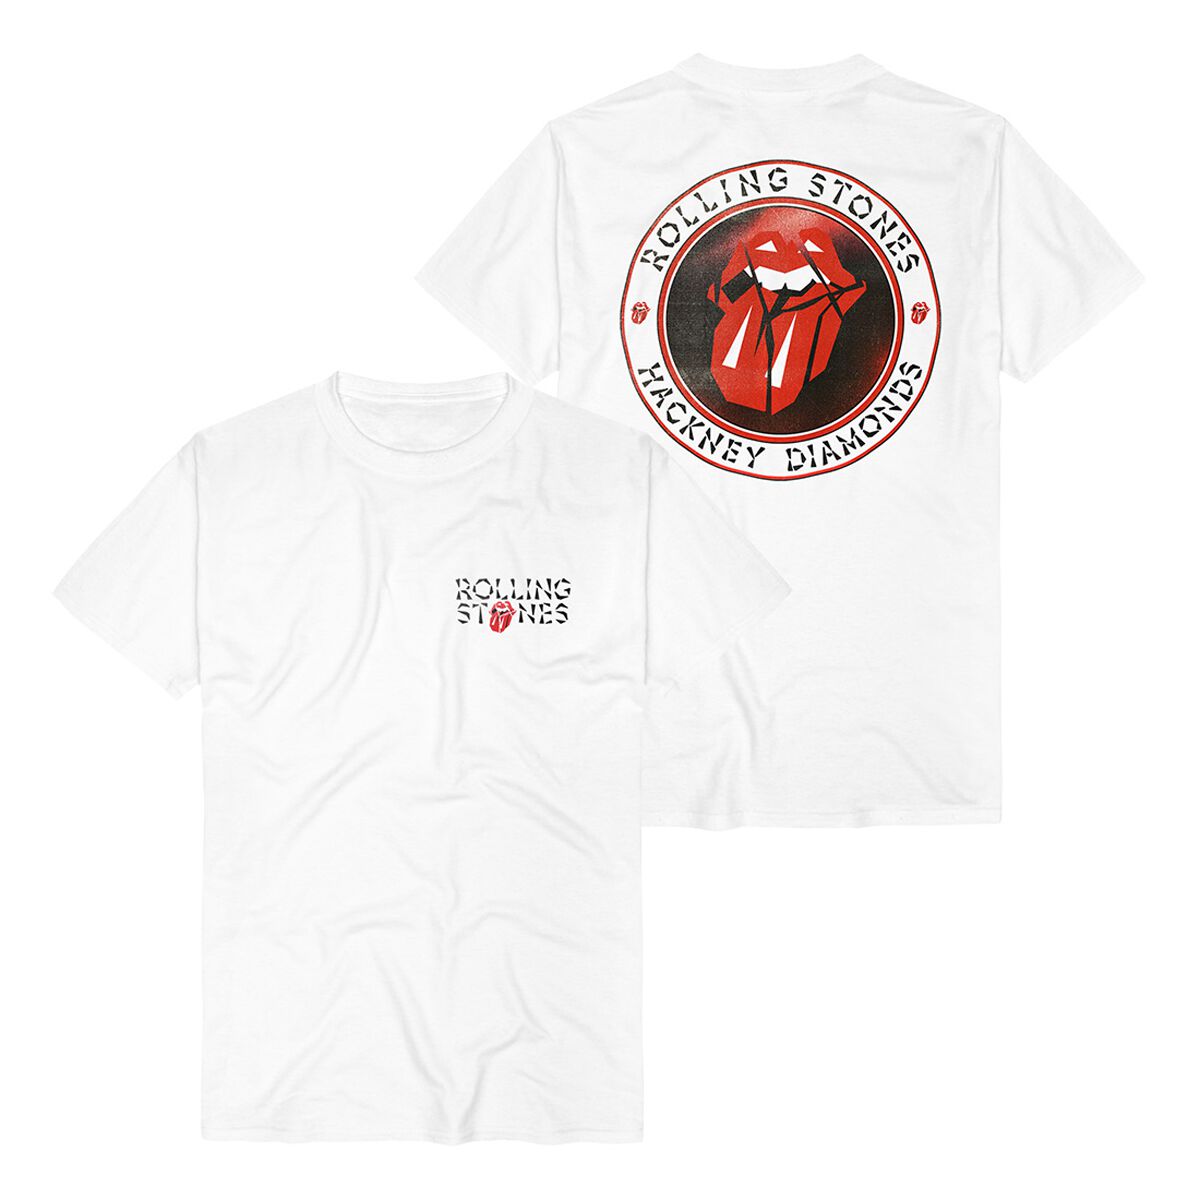 The Rolling Stones Hackney Diamonds Circle Label T-Shirt weiß in 3XL